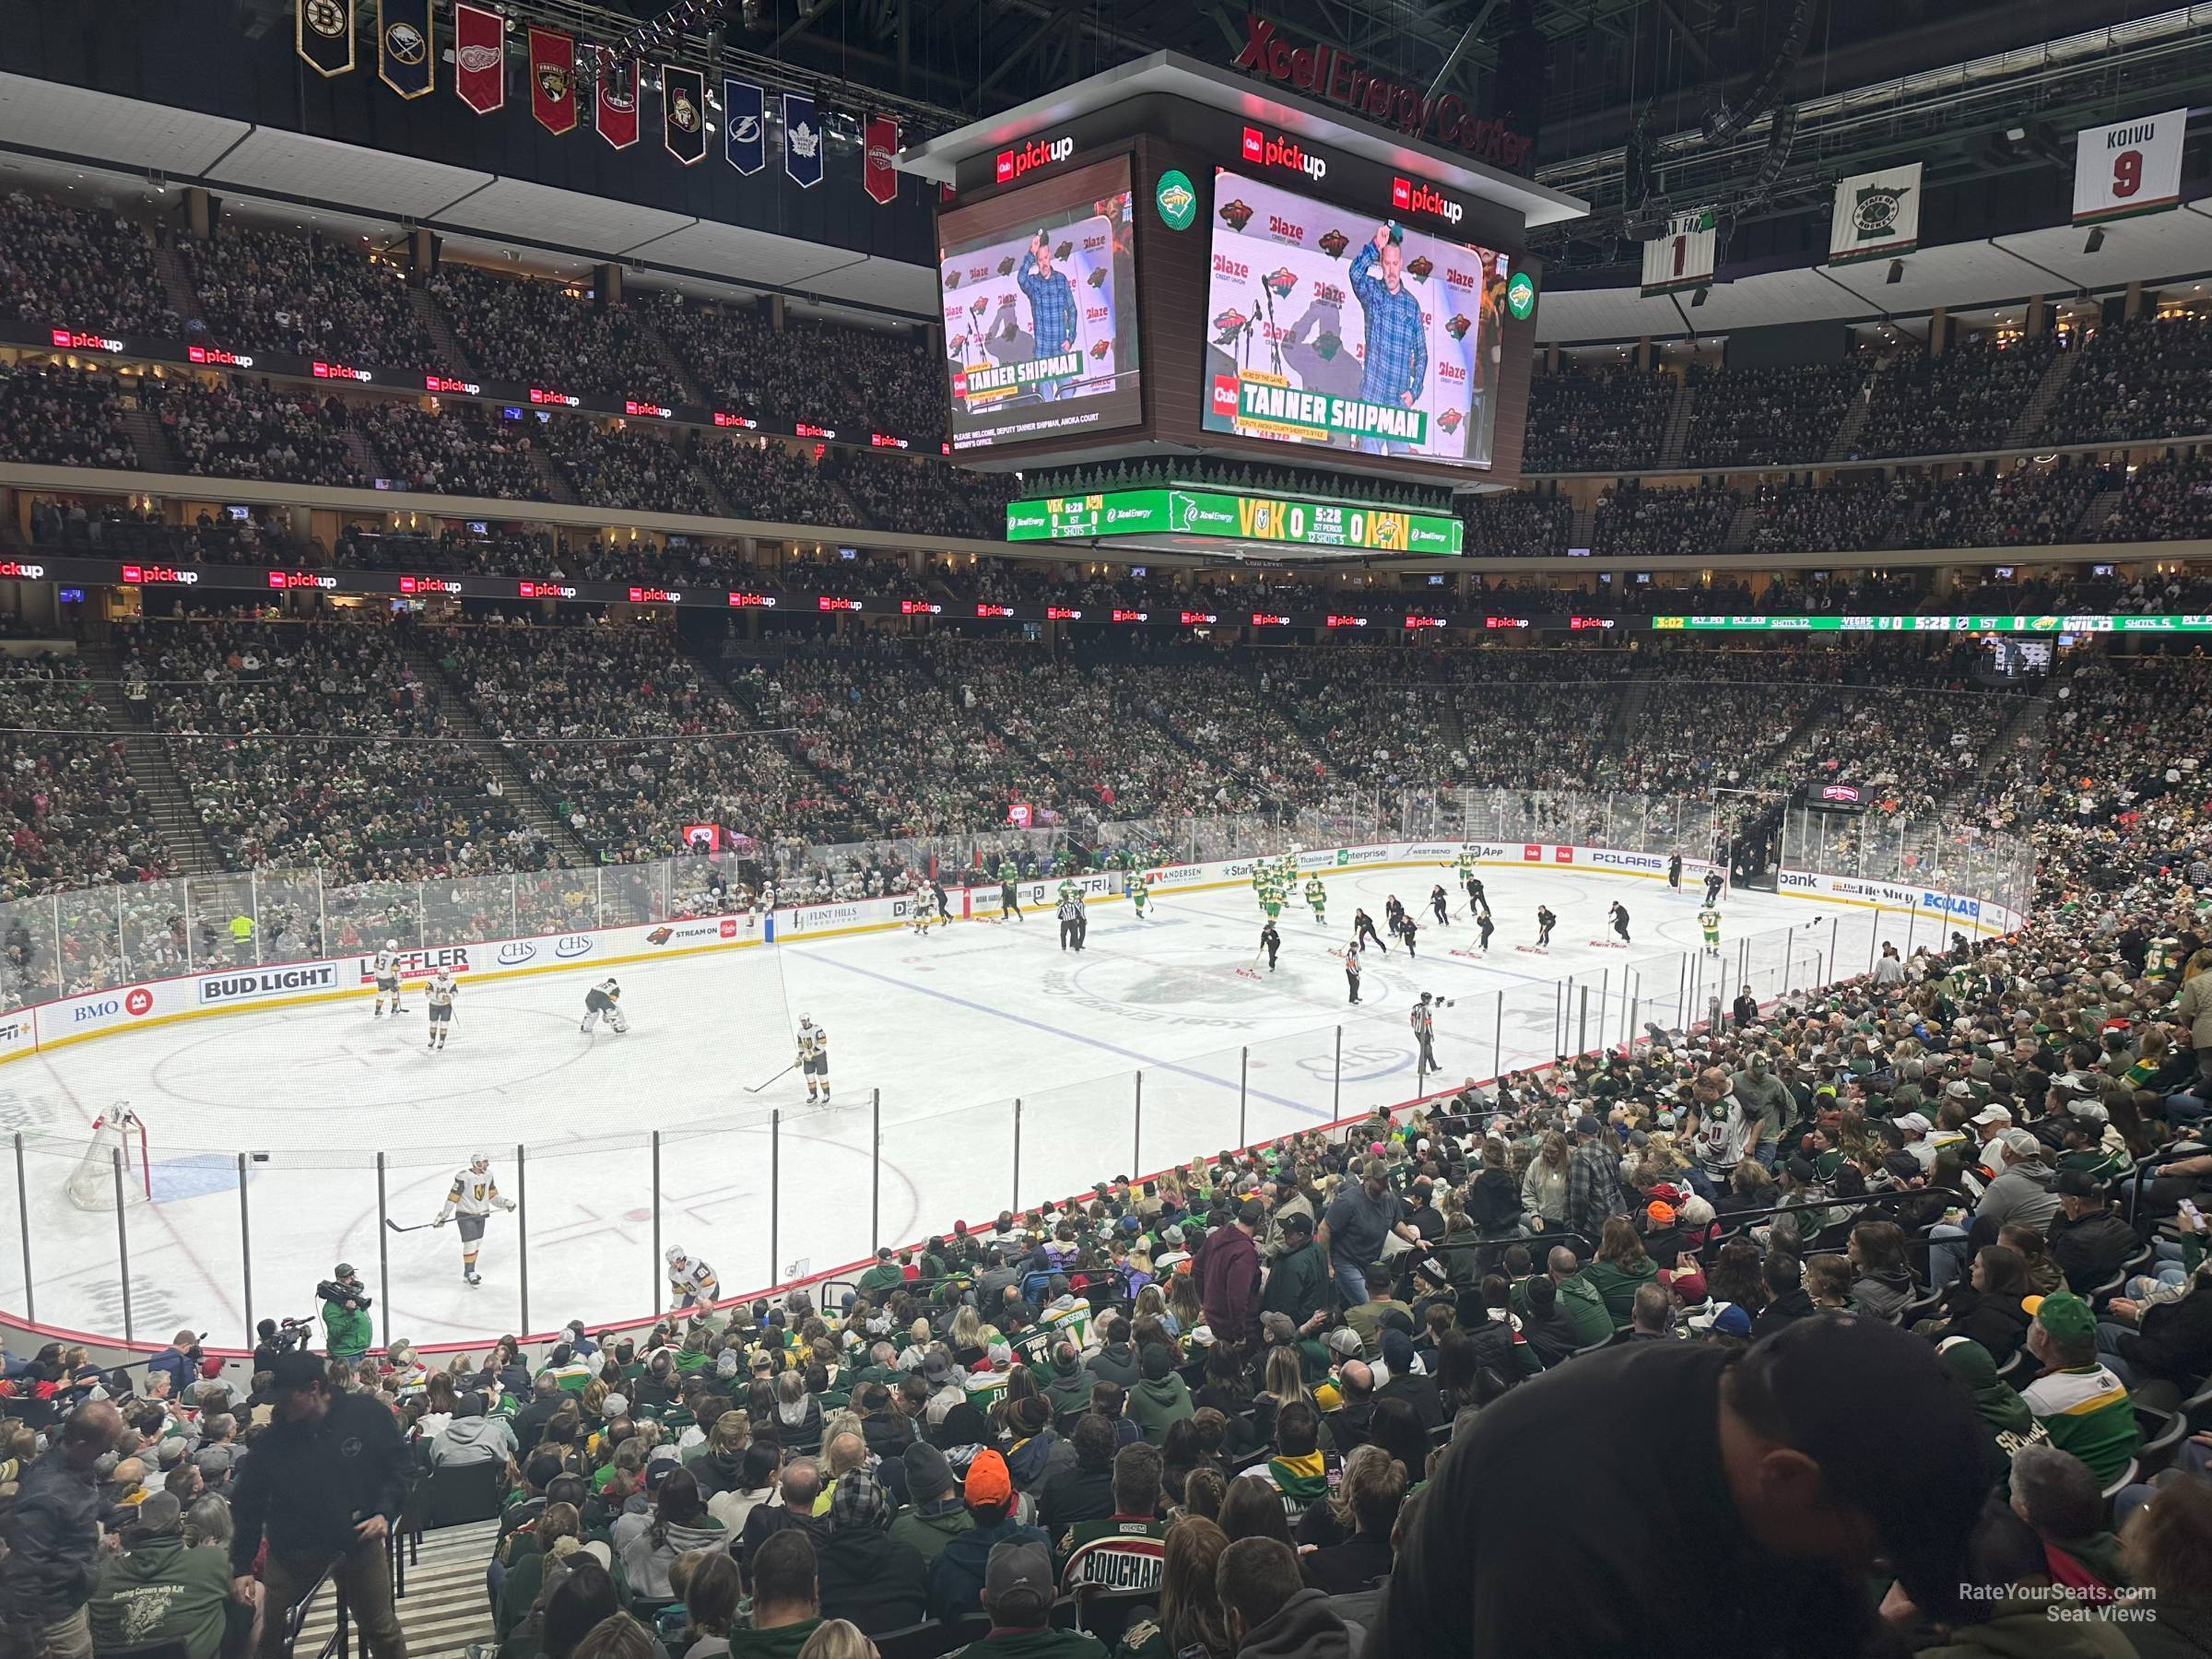 section 106, row 23 seat view  for hockey - xcel energy center